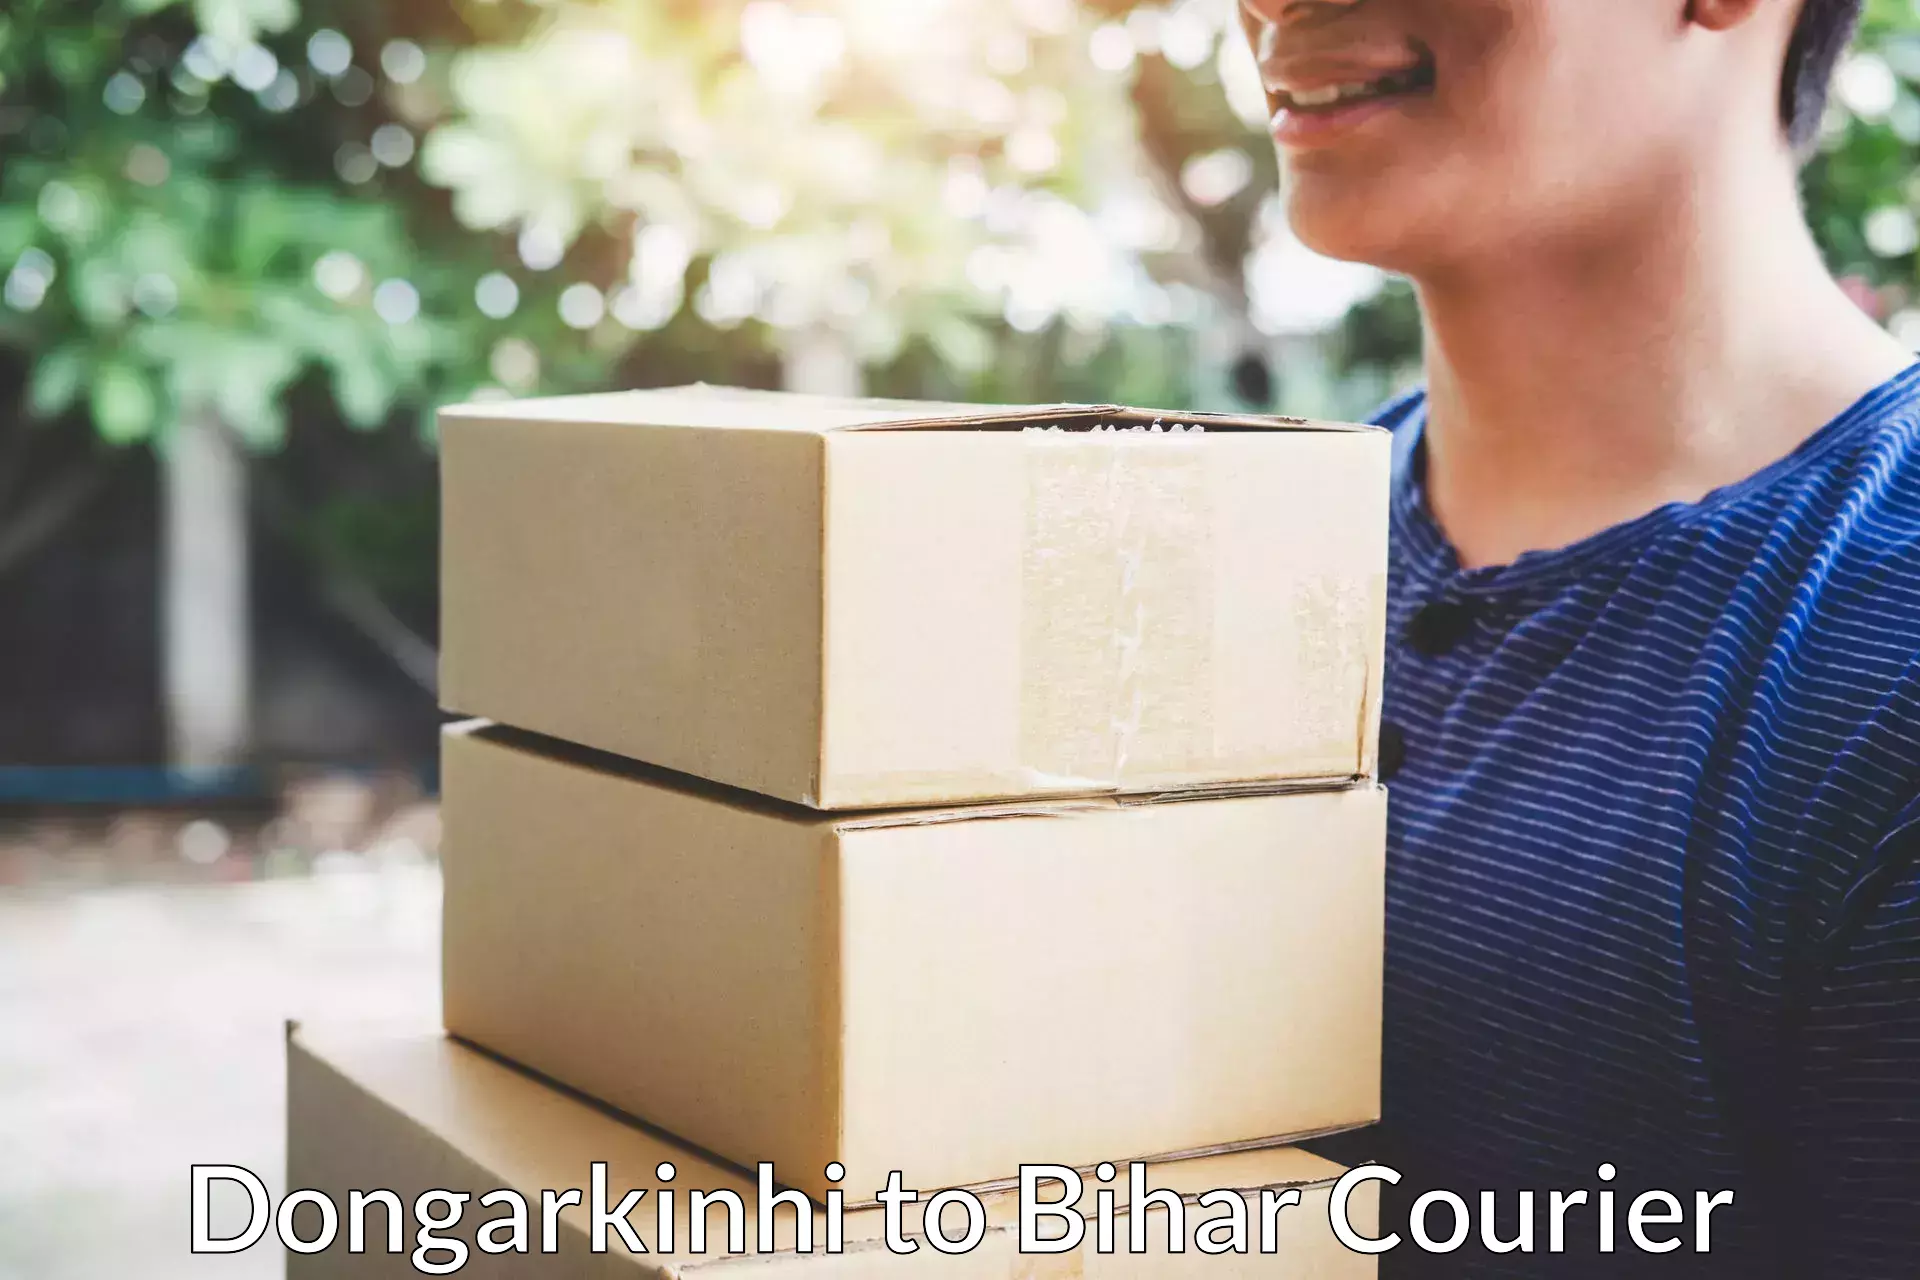 Professional moving assistance Dongarkinhi to Phulparas